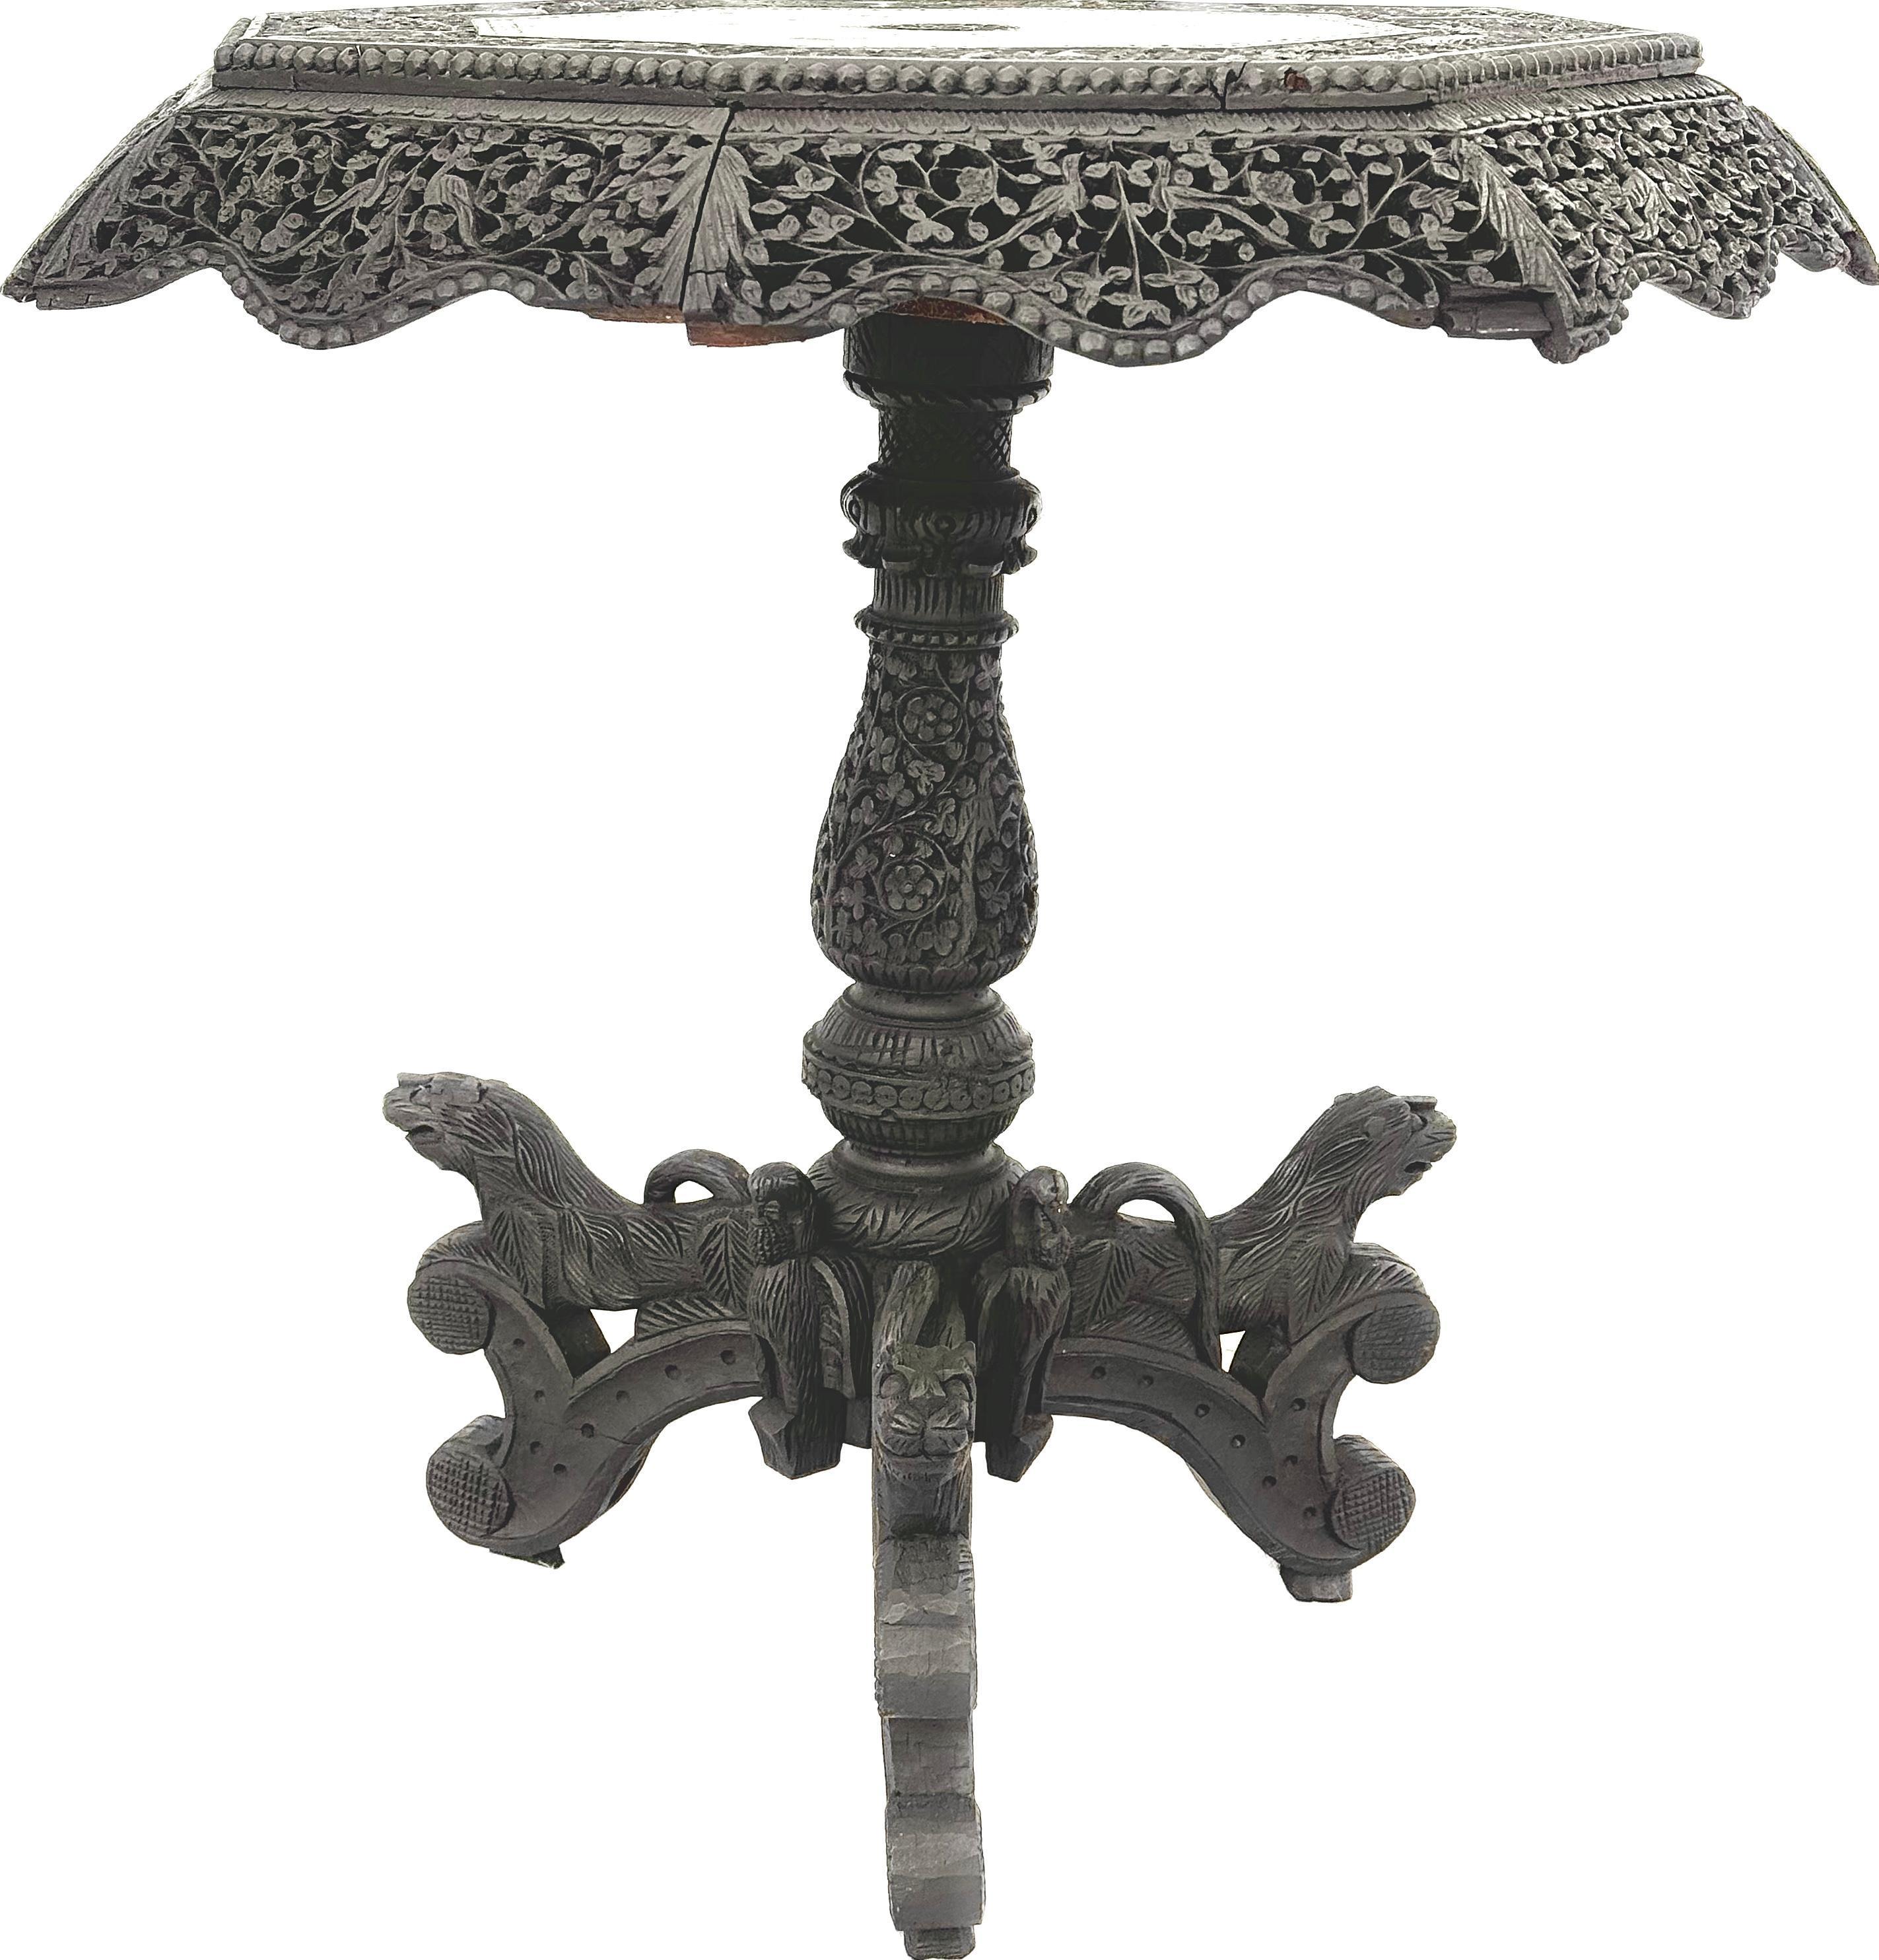 Exquisite 19th Century Carved Burmese Anglo-Indian round side table. Table features an intricately carved and filigreed apron with a pedestal base. Base is ornamented with carved tiger heads on tripod legs. 